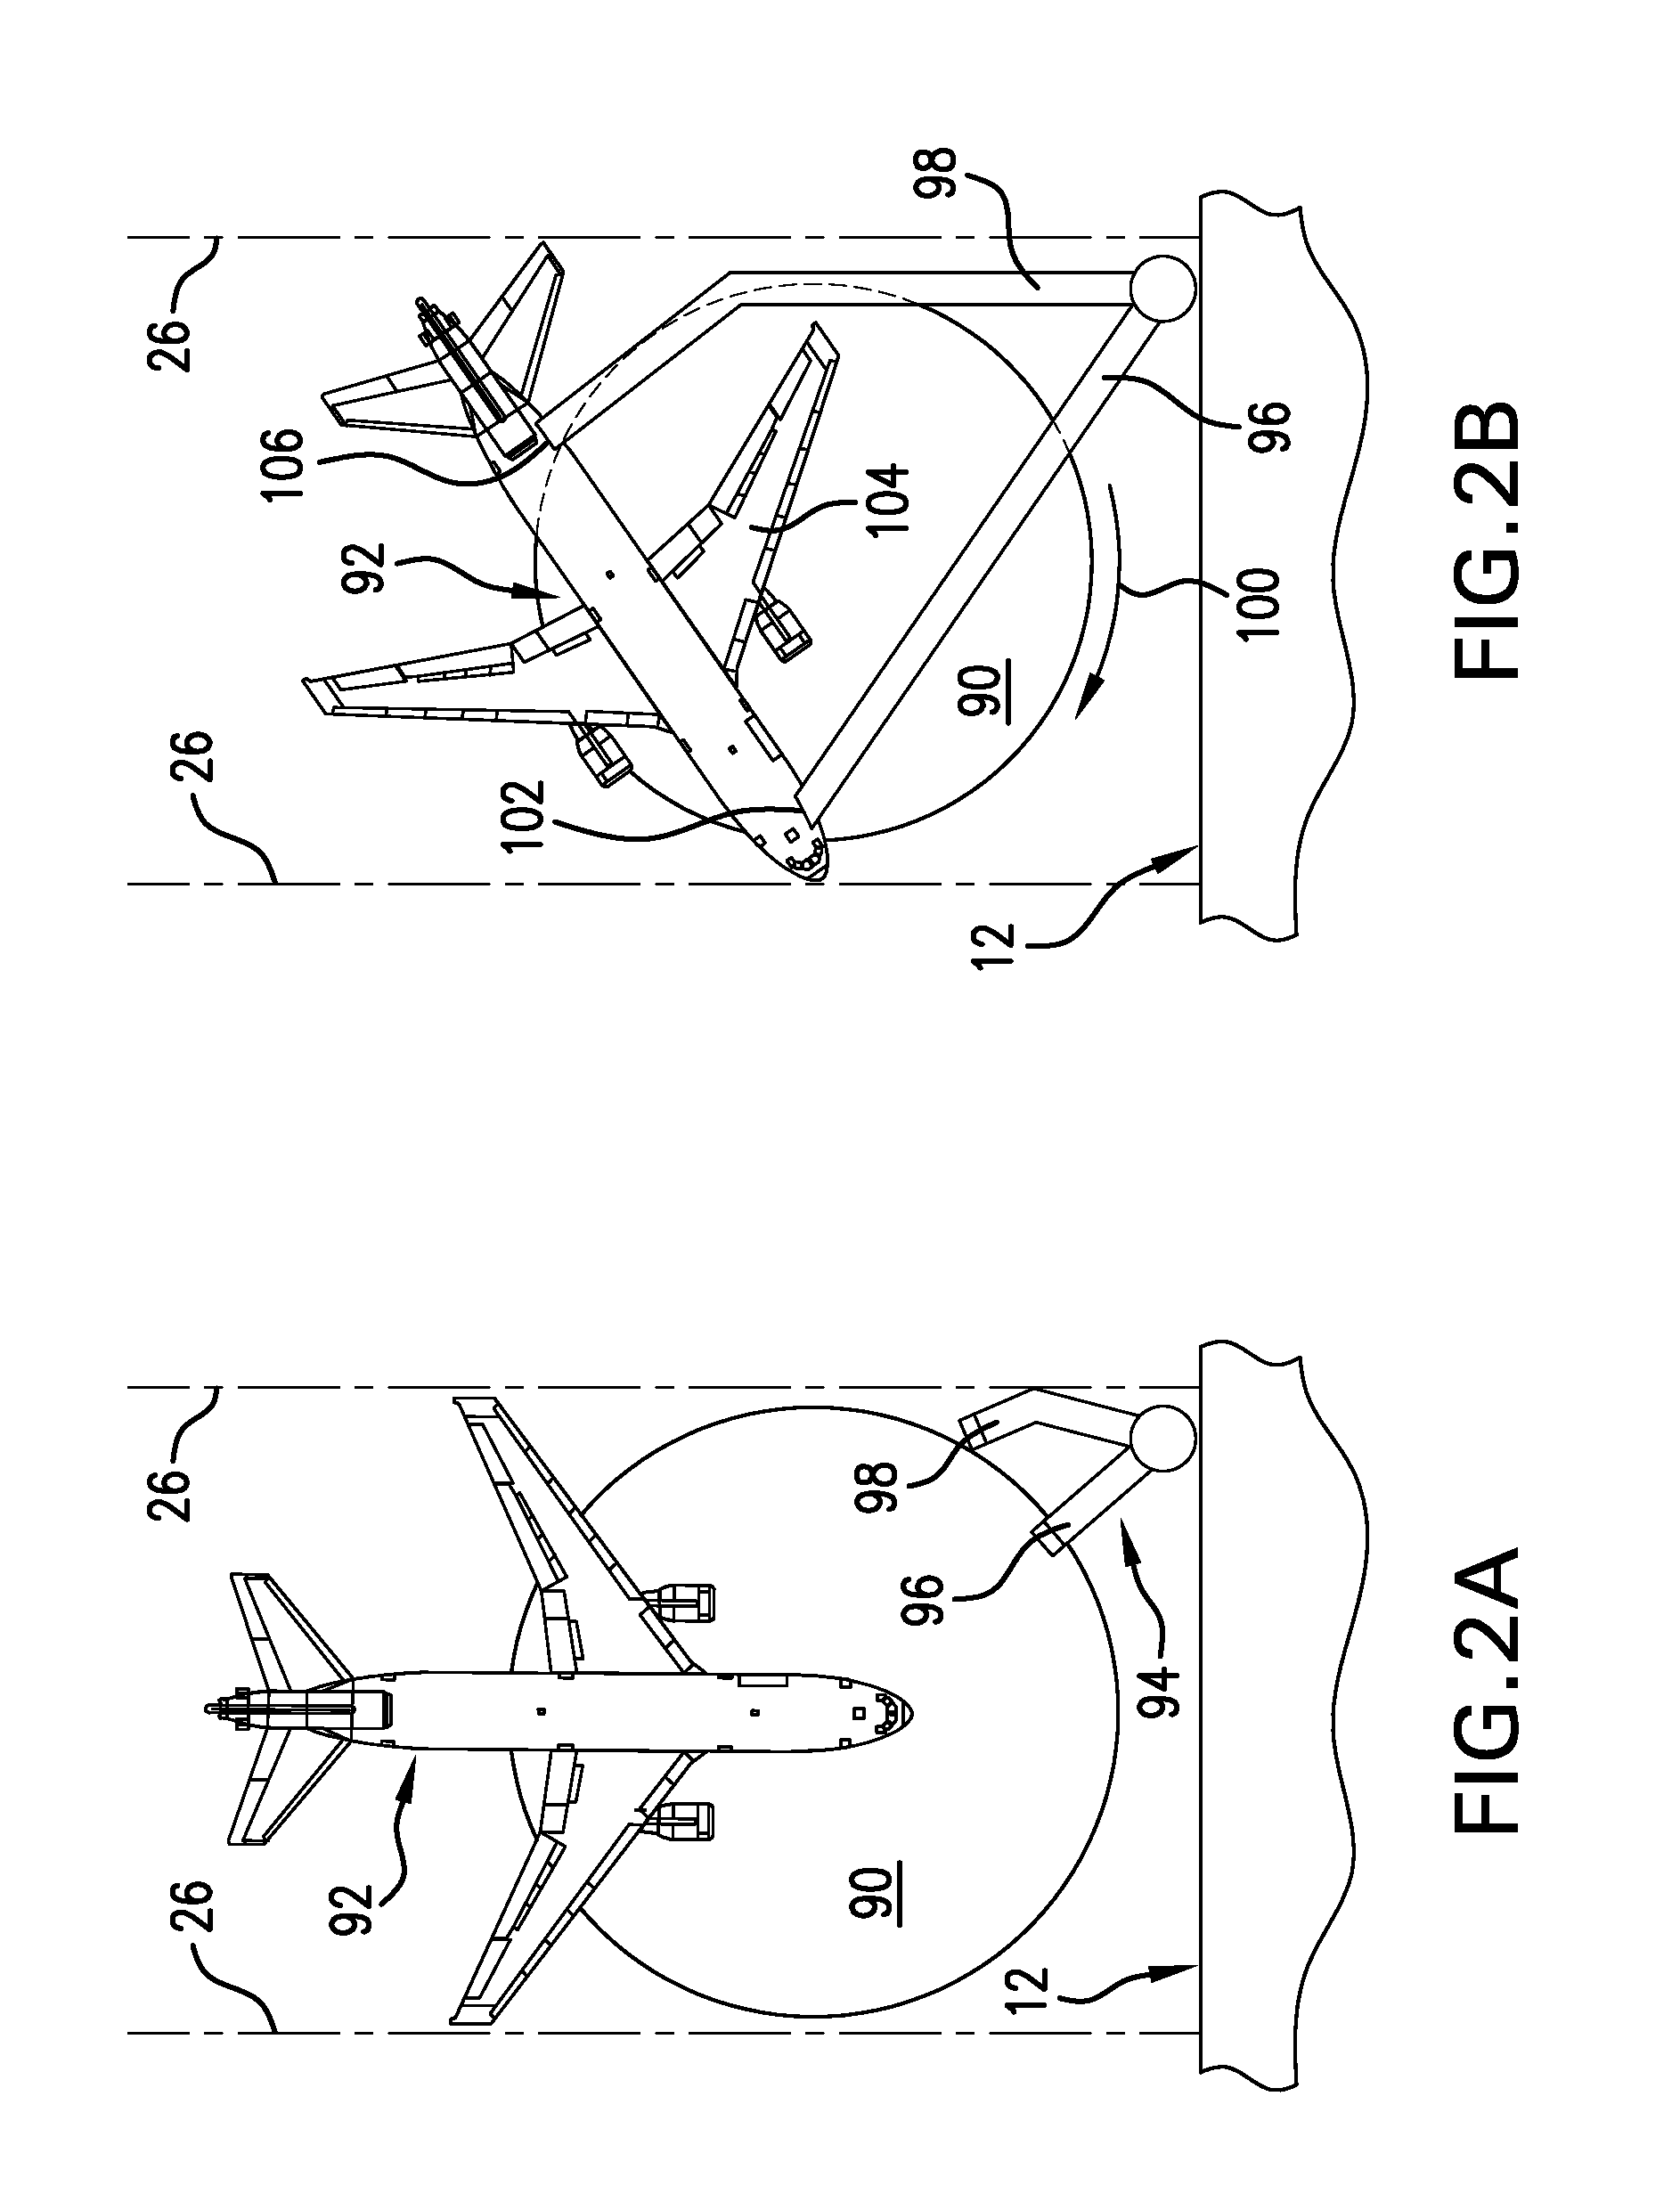 Aircraft Gate Parking and Servicing Method